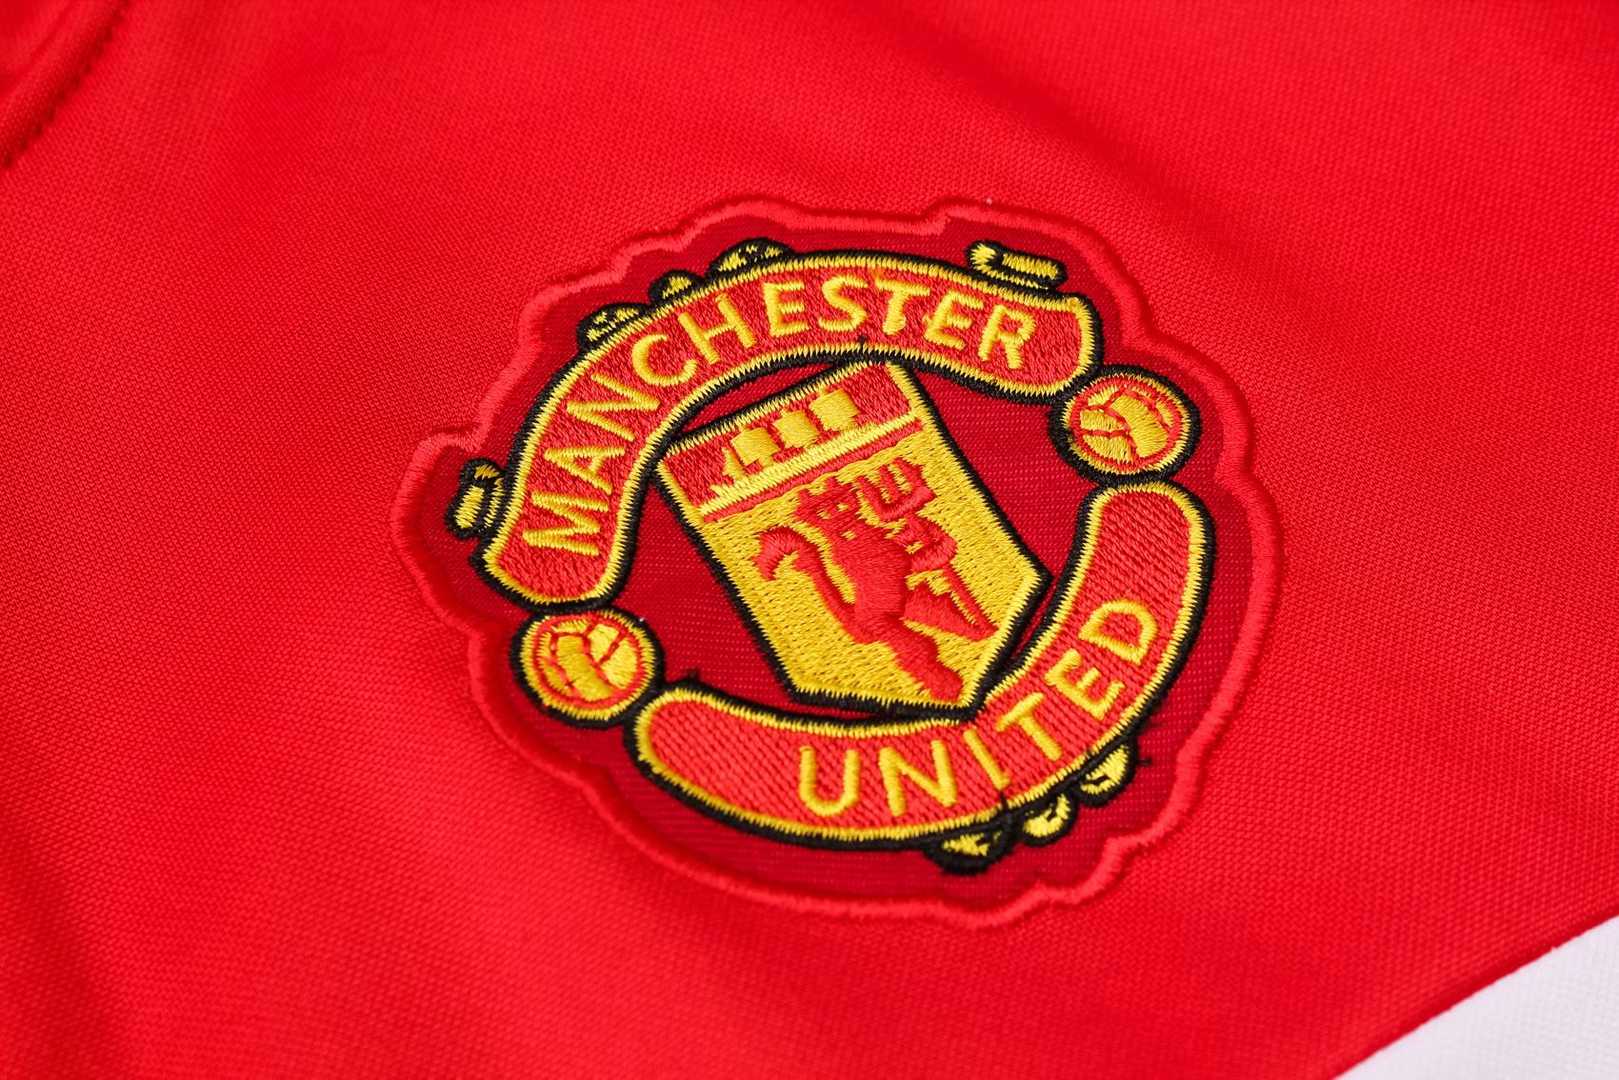 2019/20 Manchester United Hoodie Red Mens Soccer Training Suit(Jacket + Pants)